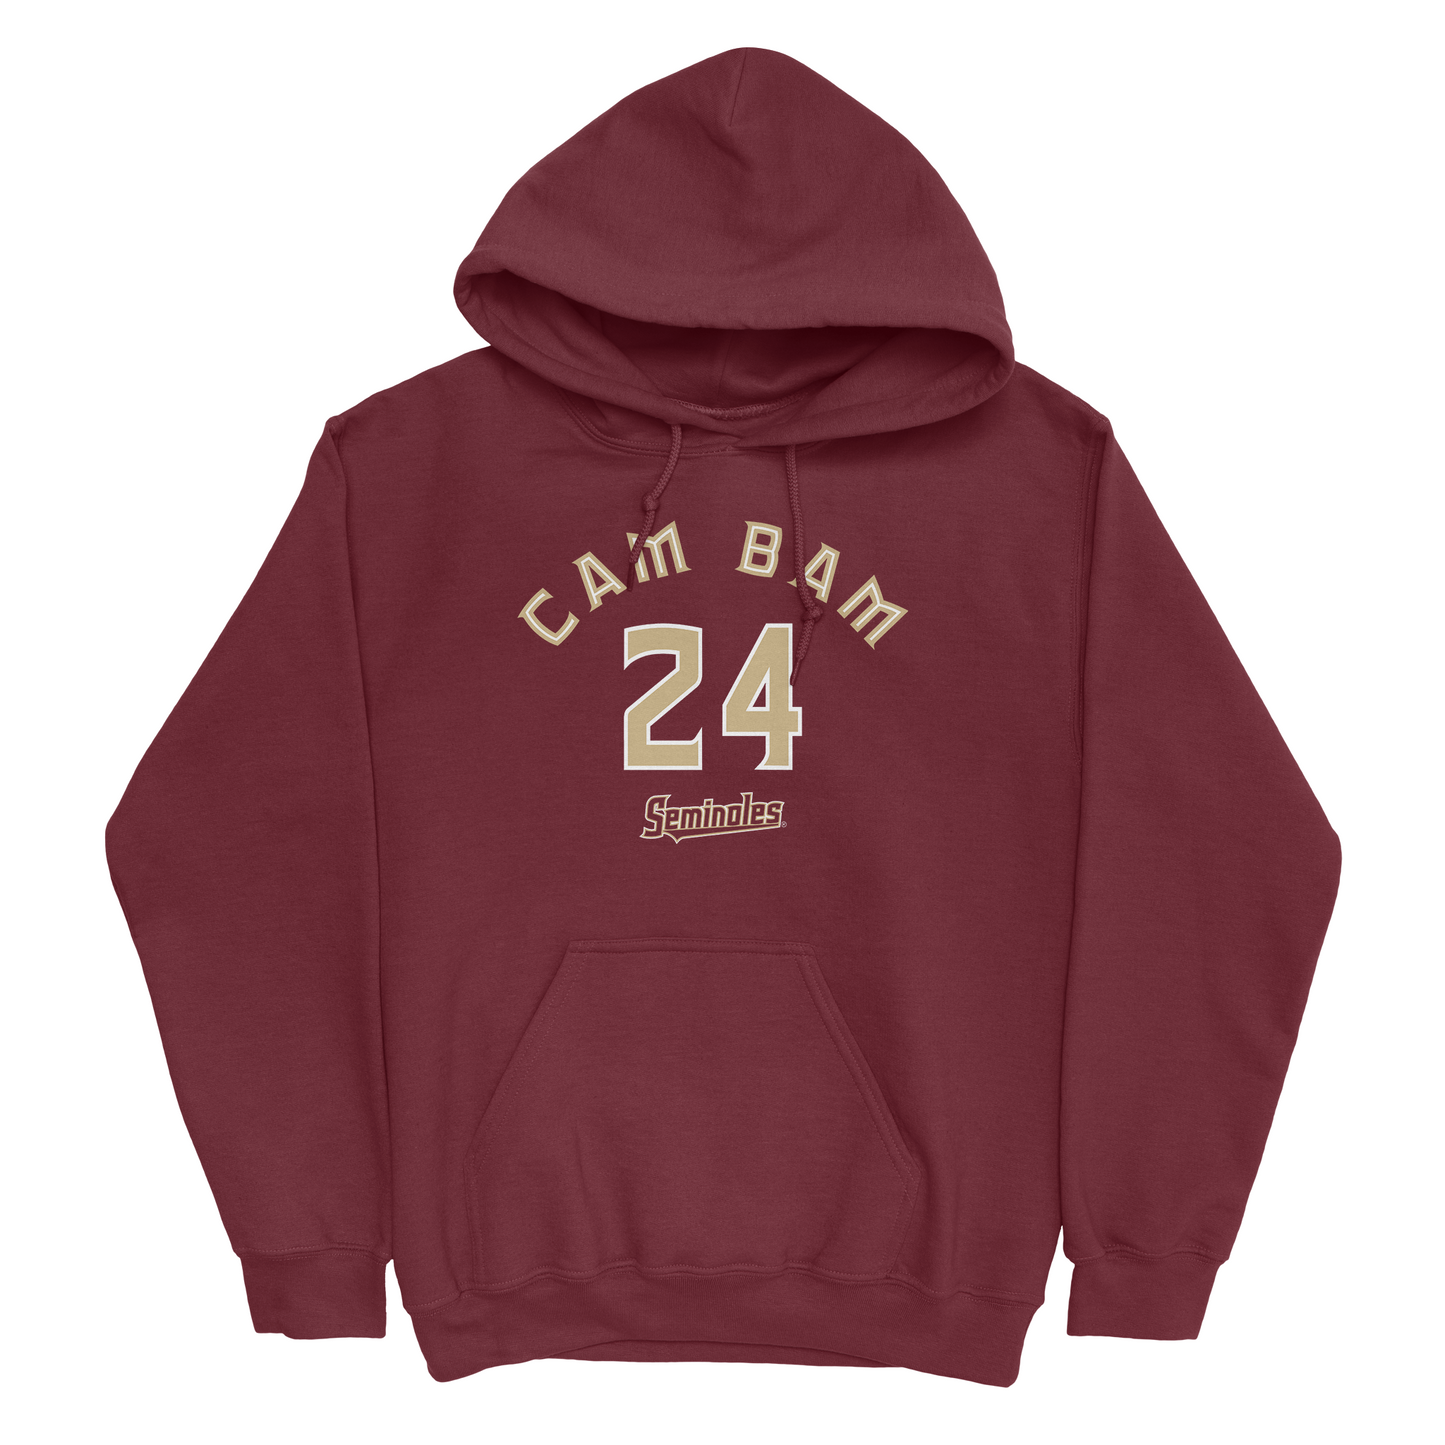 EXCLUSIVE RELEASE: Cam Bam Hoodie